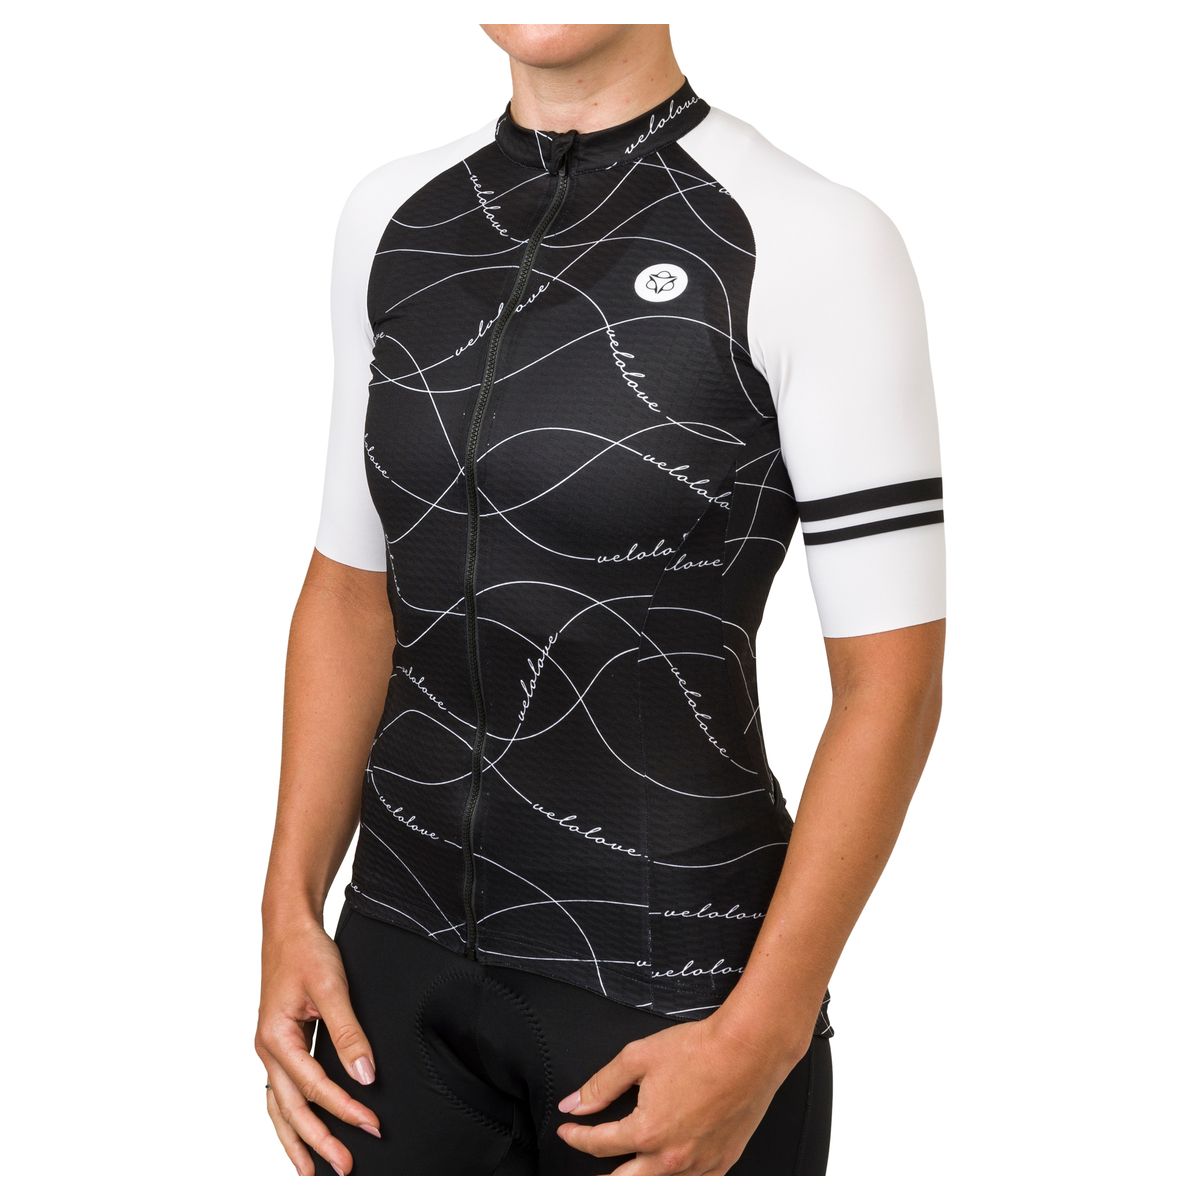 Velo Wave Maillot Essential Mujeres fit example